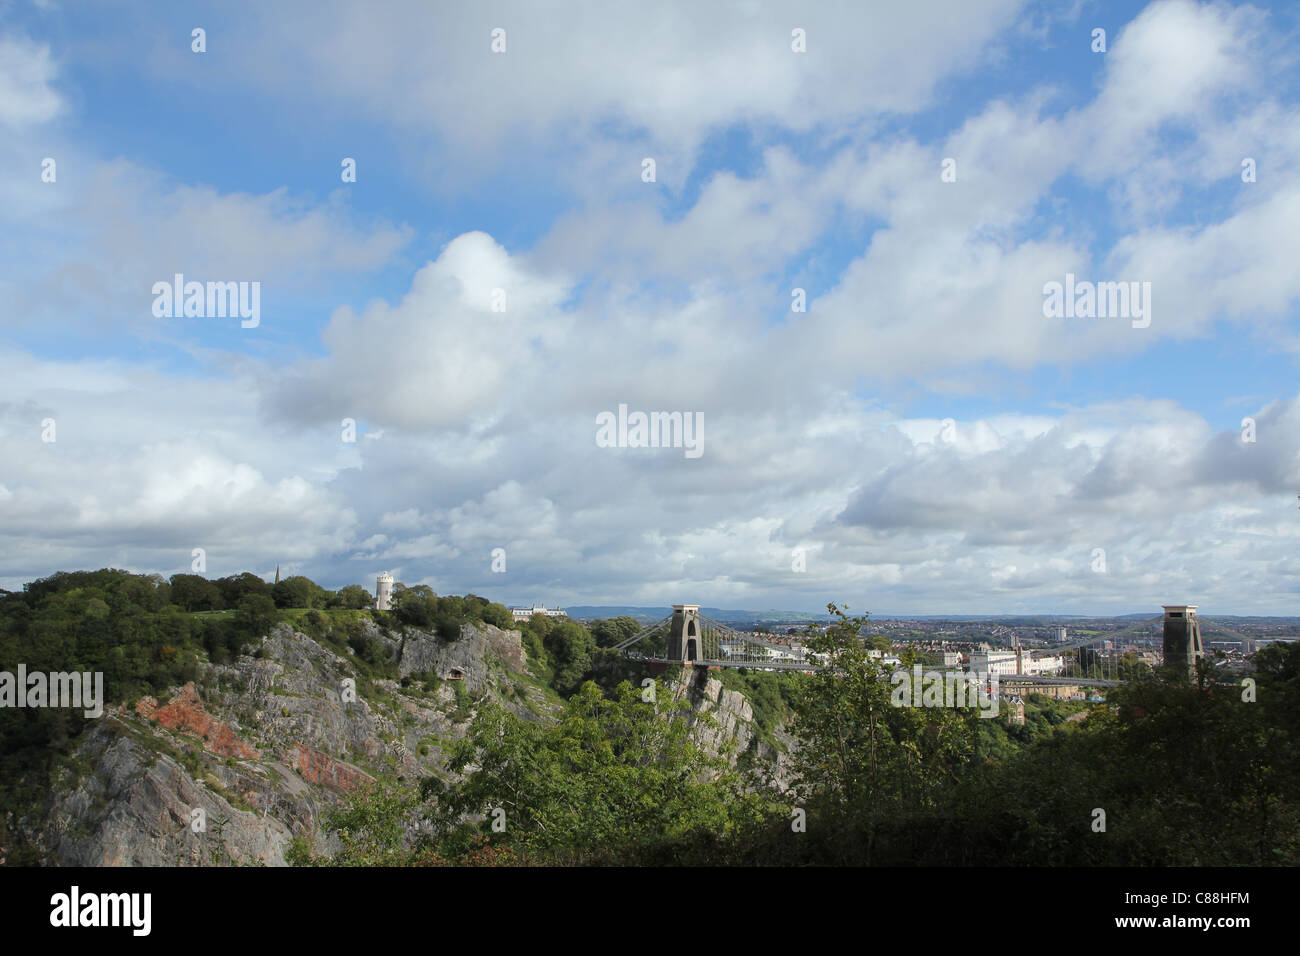 Clifton Suspension Bridge, Avon Gorge, Camera Obscura, Durham Downs viewed from Leigh Woods, Bristol, England, UK Stock Photo